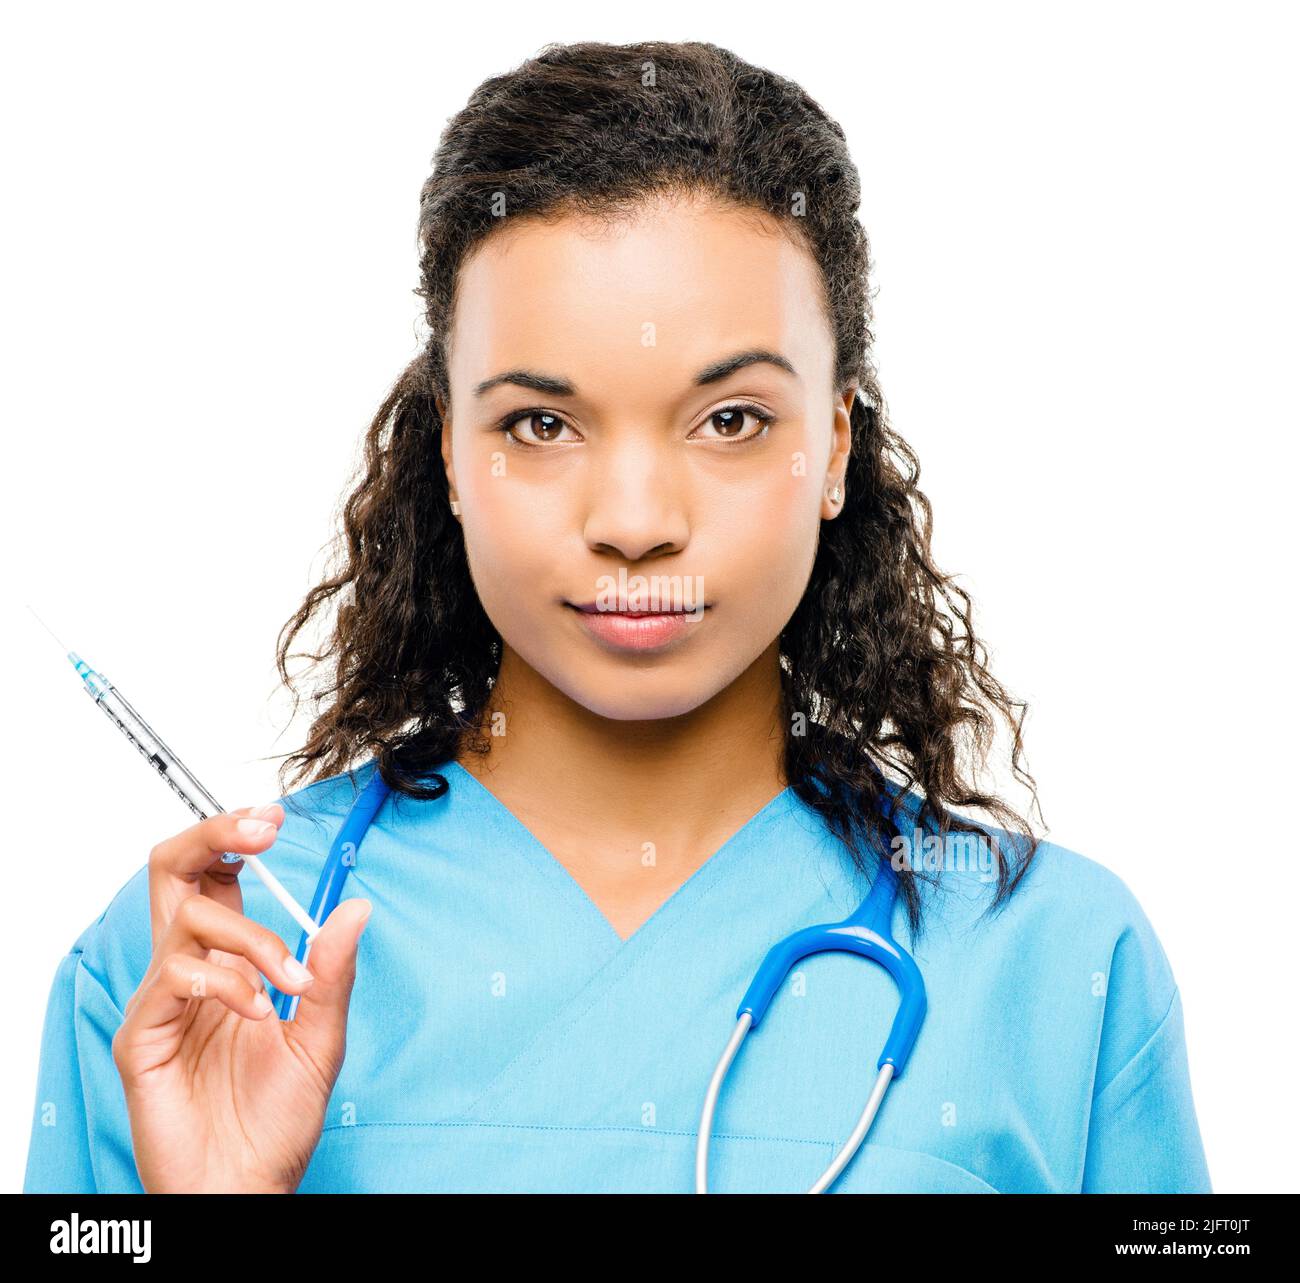 This wont hurt one bit. Shot of a young female doctor ready to inject a patient against a studio background. Stock Photo